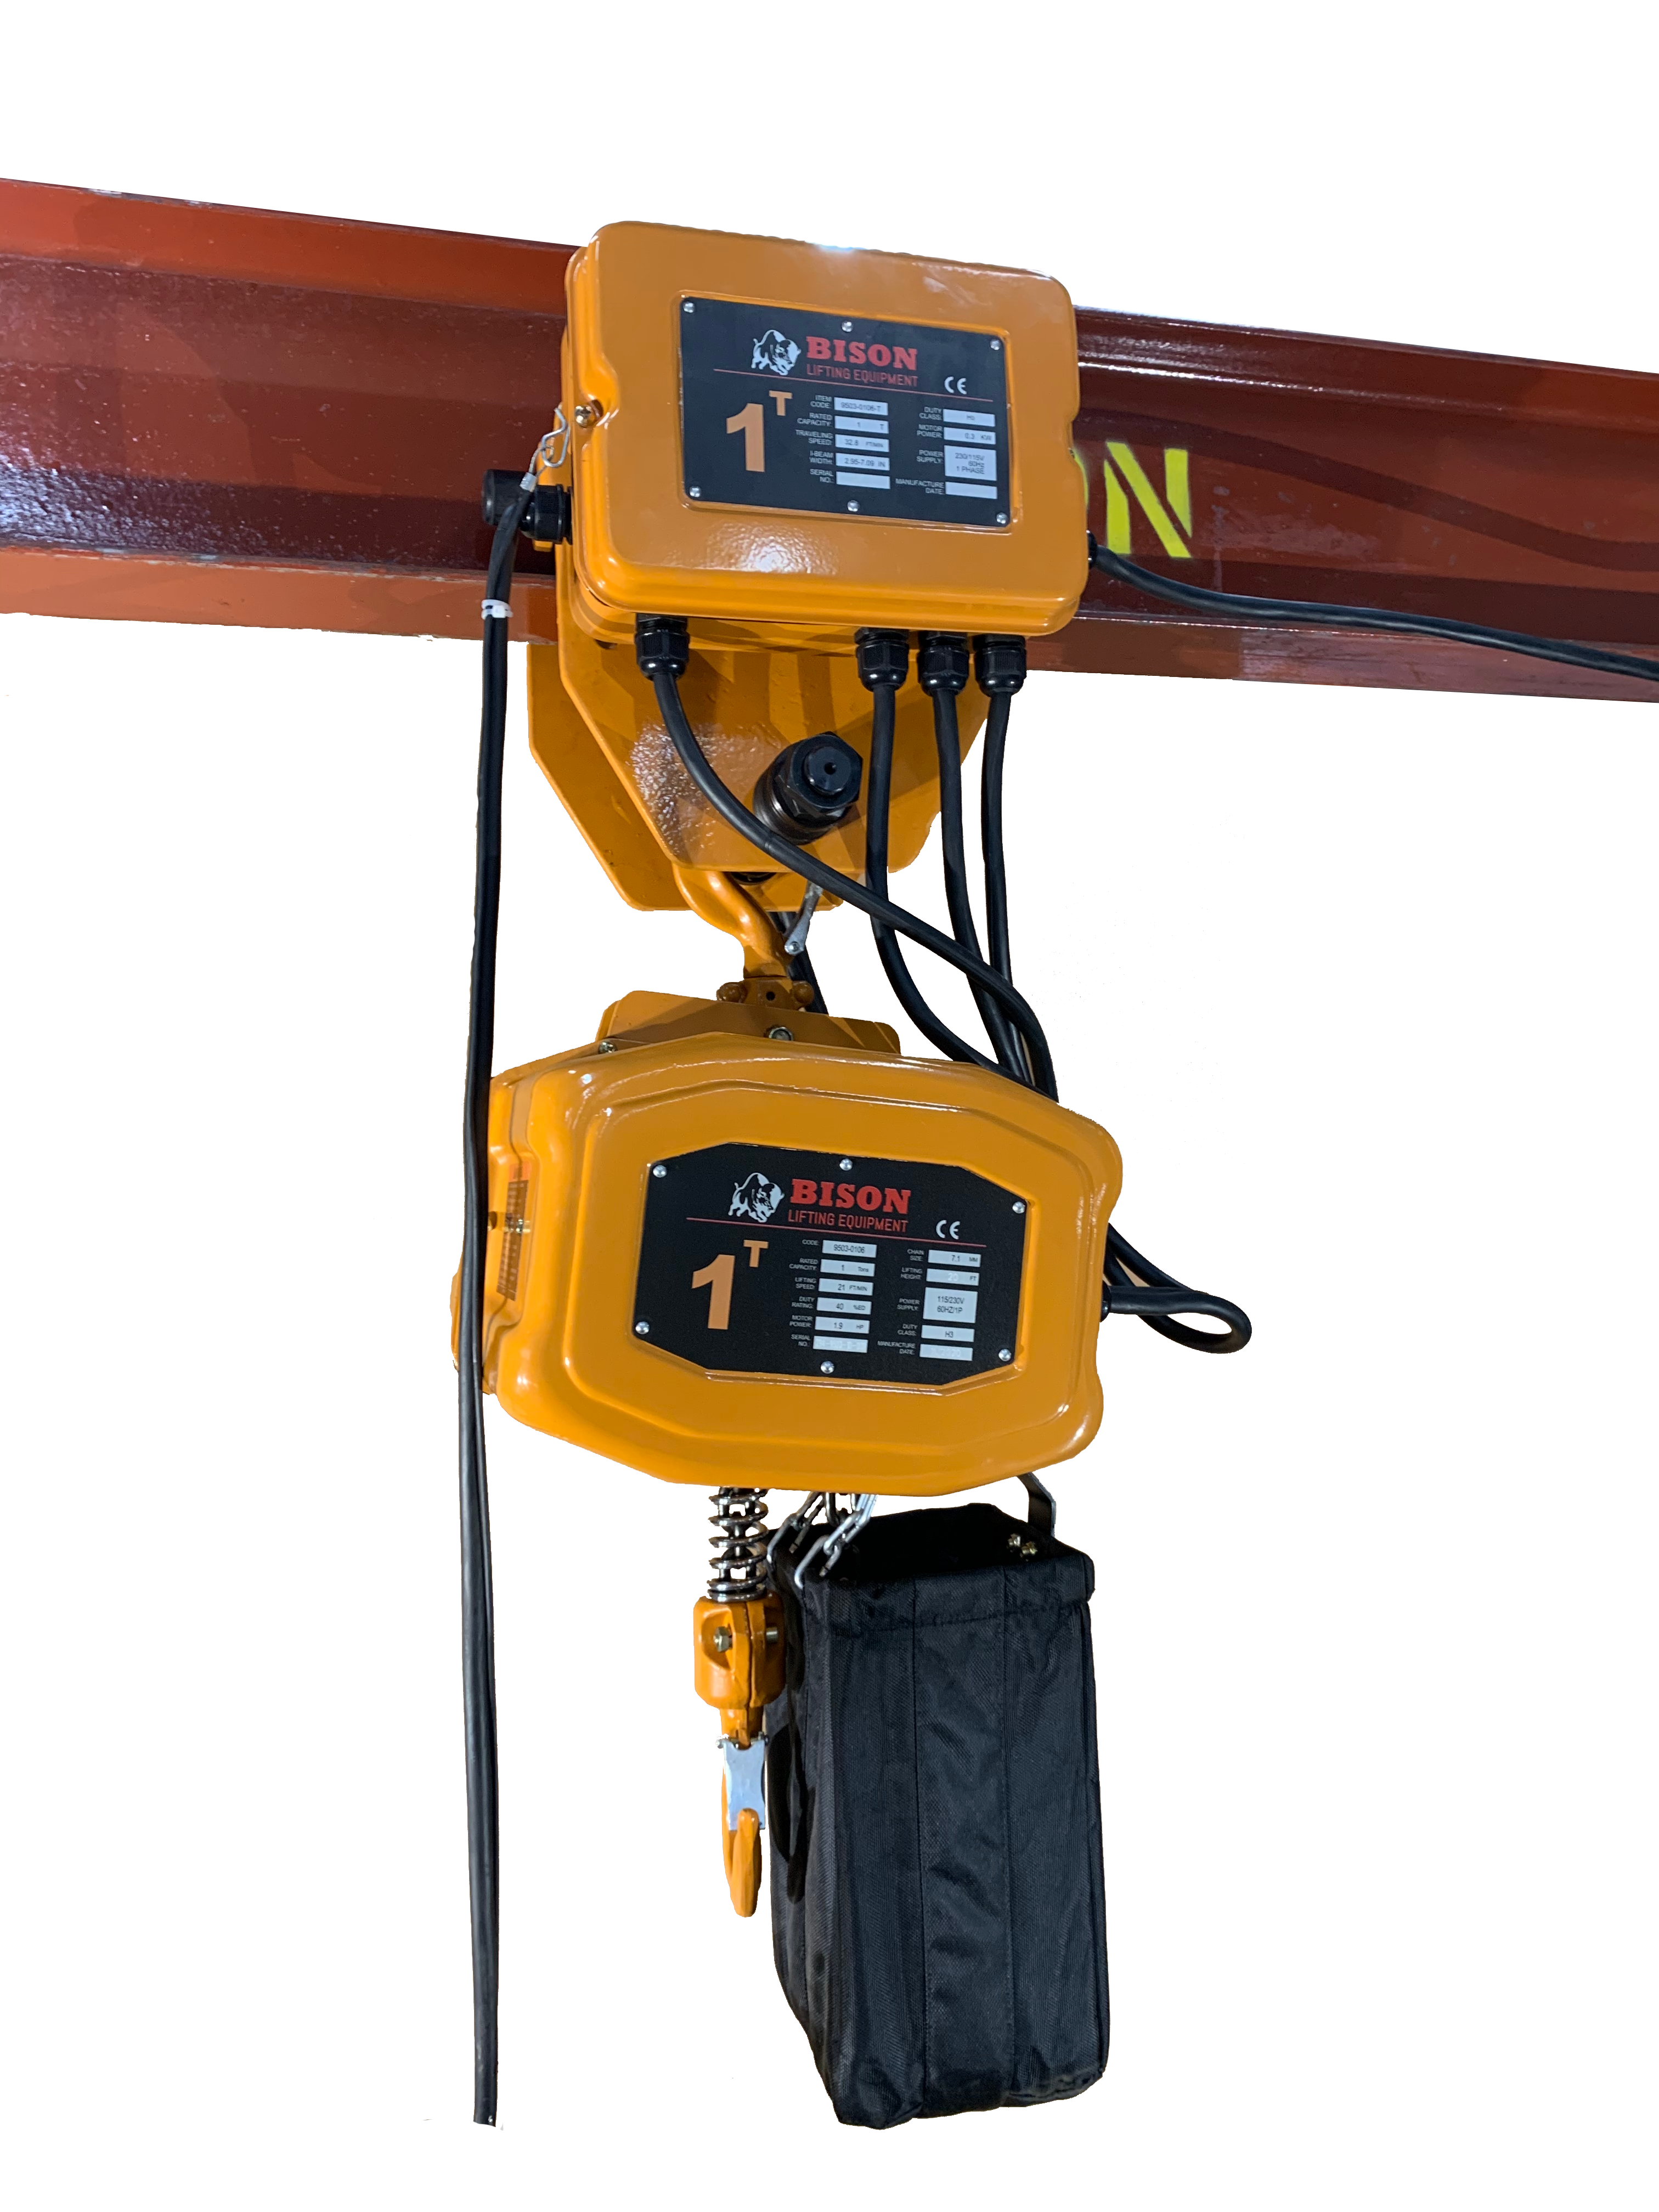 Bison 3Ton Single Phase Electric Chain Hoist with Motorized Trolley 115v/230v